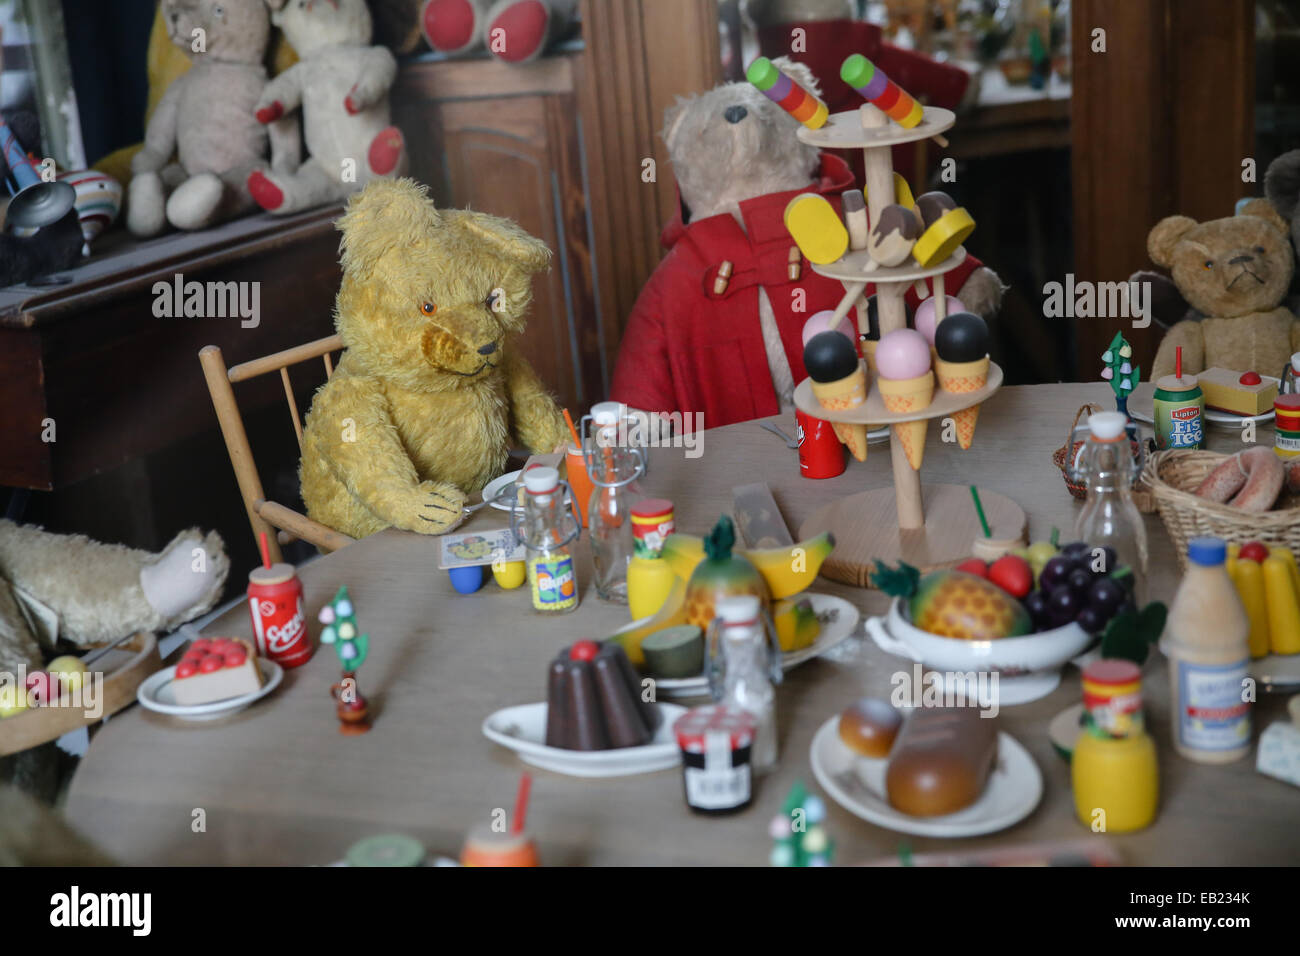 toy bear table display Stock Photo